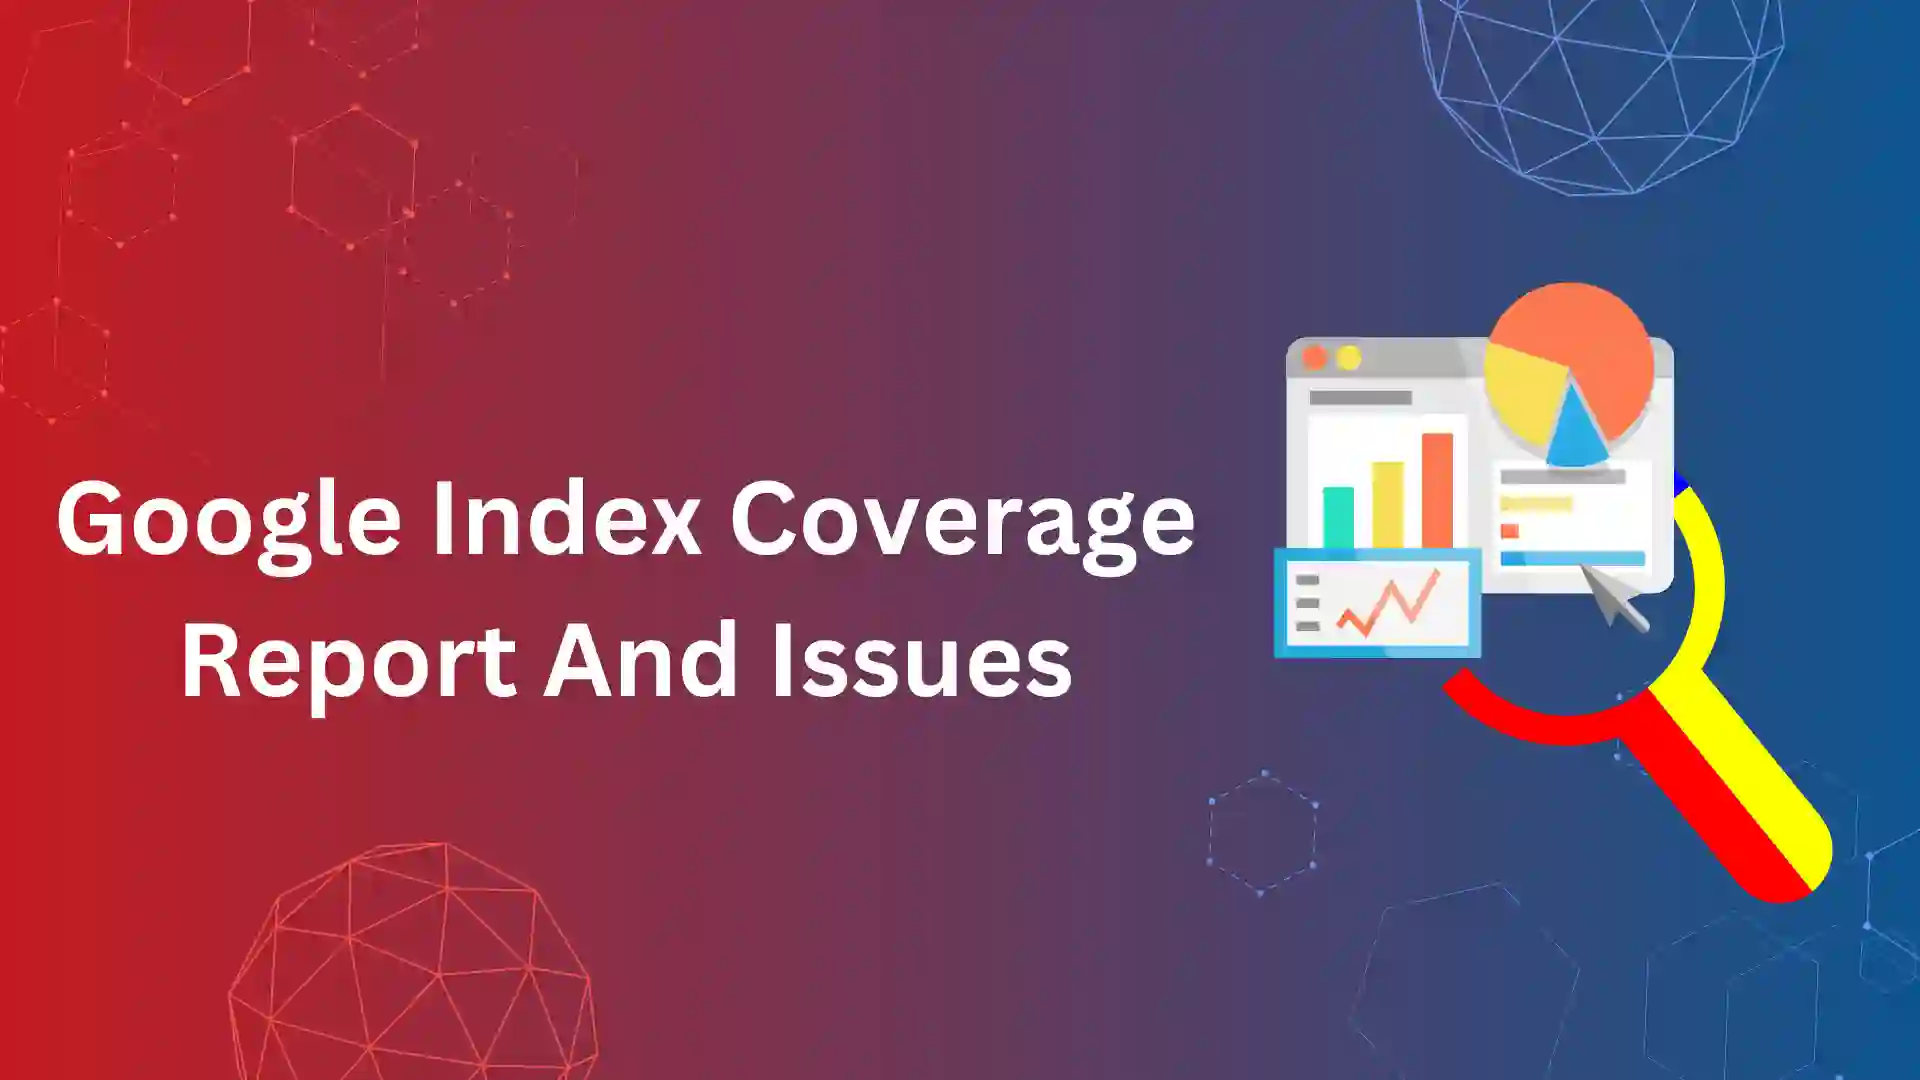 Google Index Coverage Report And Issues